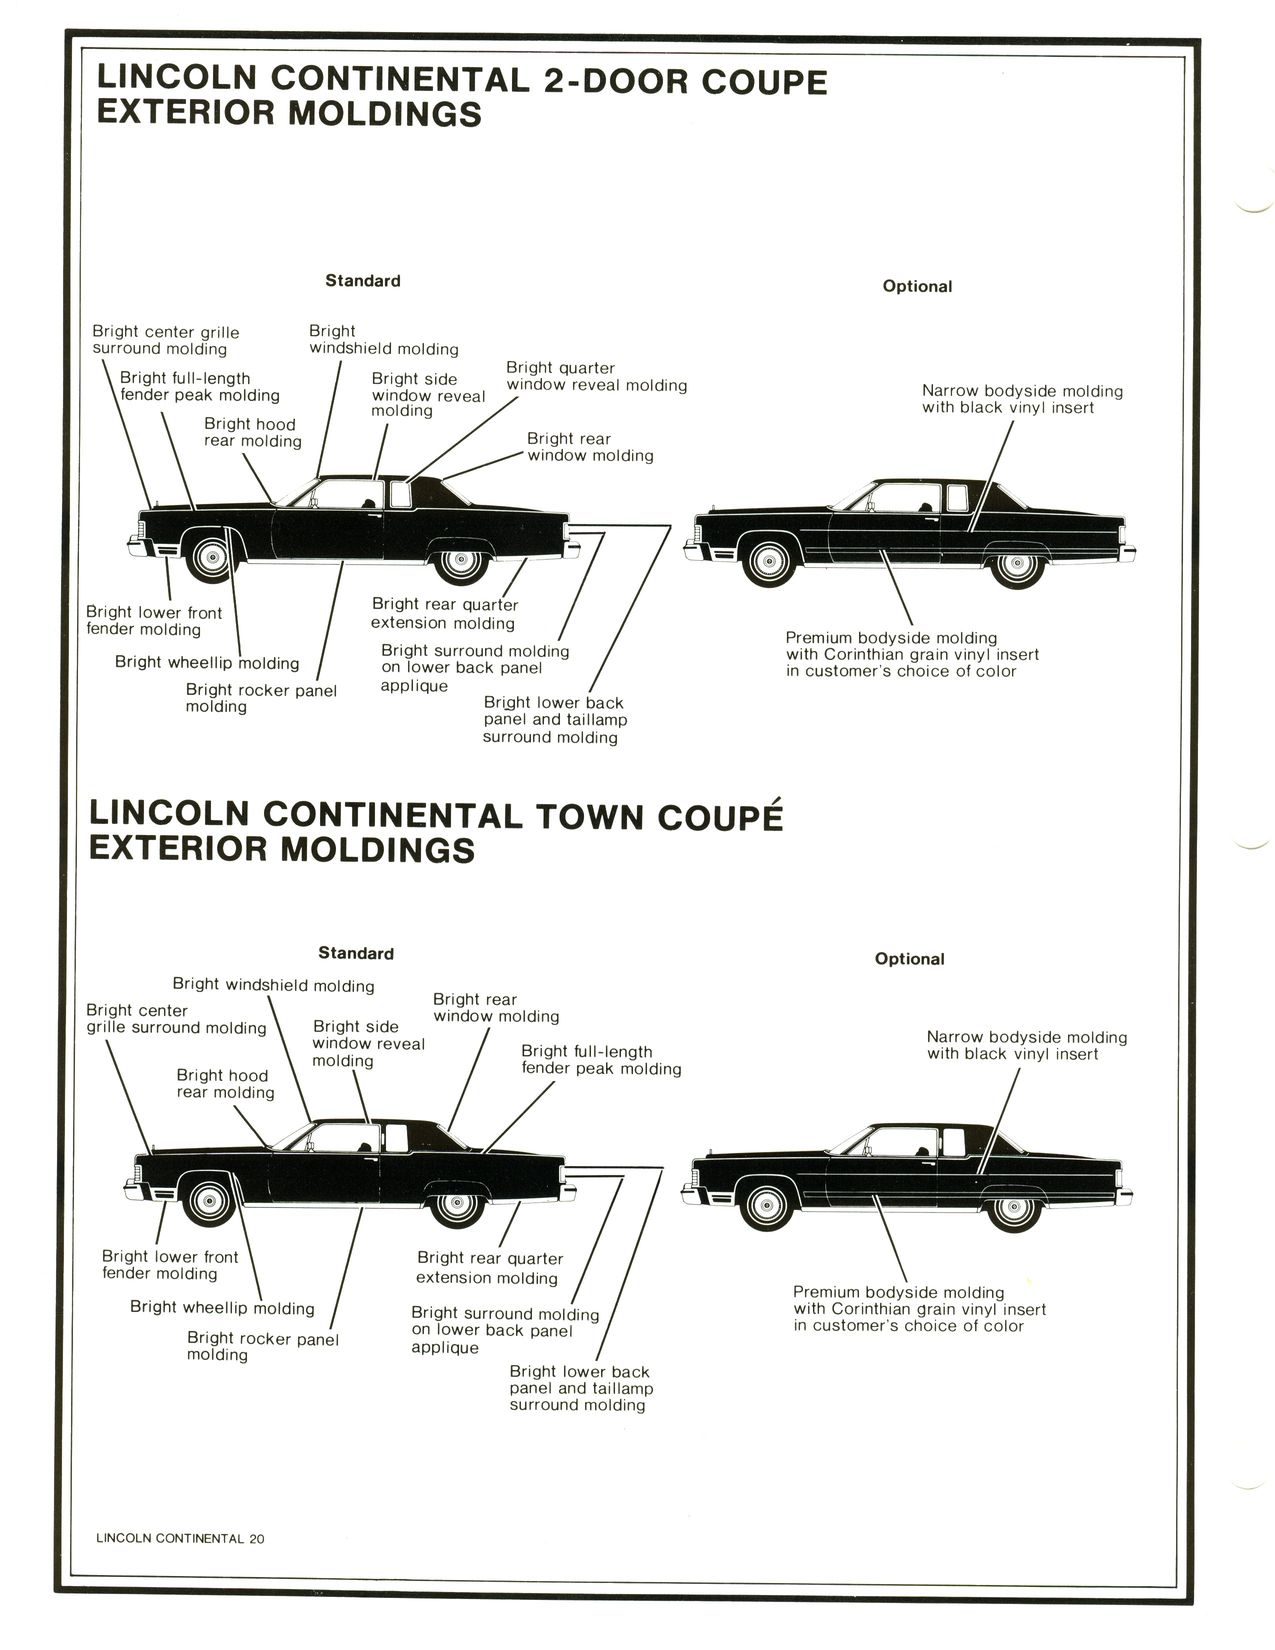 1977 Continental Product Facts Book-2-20